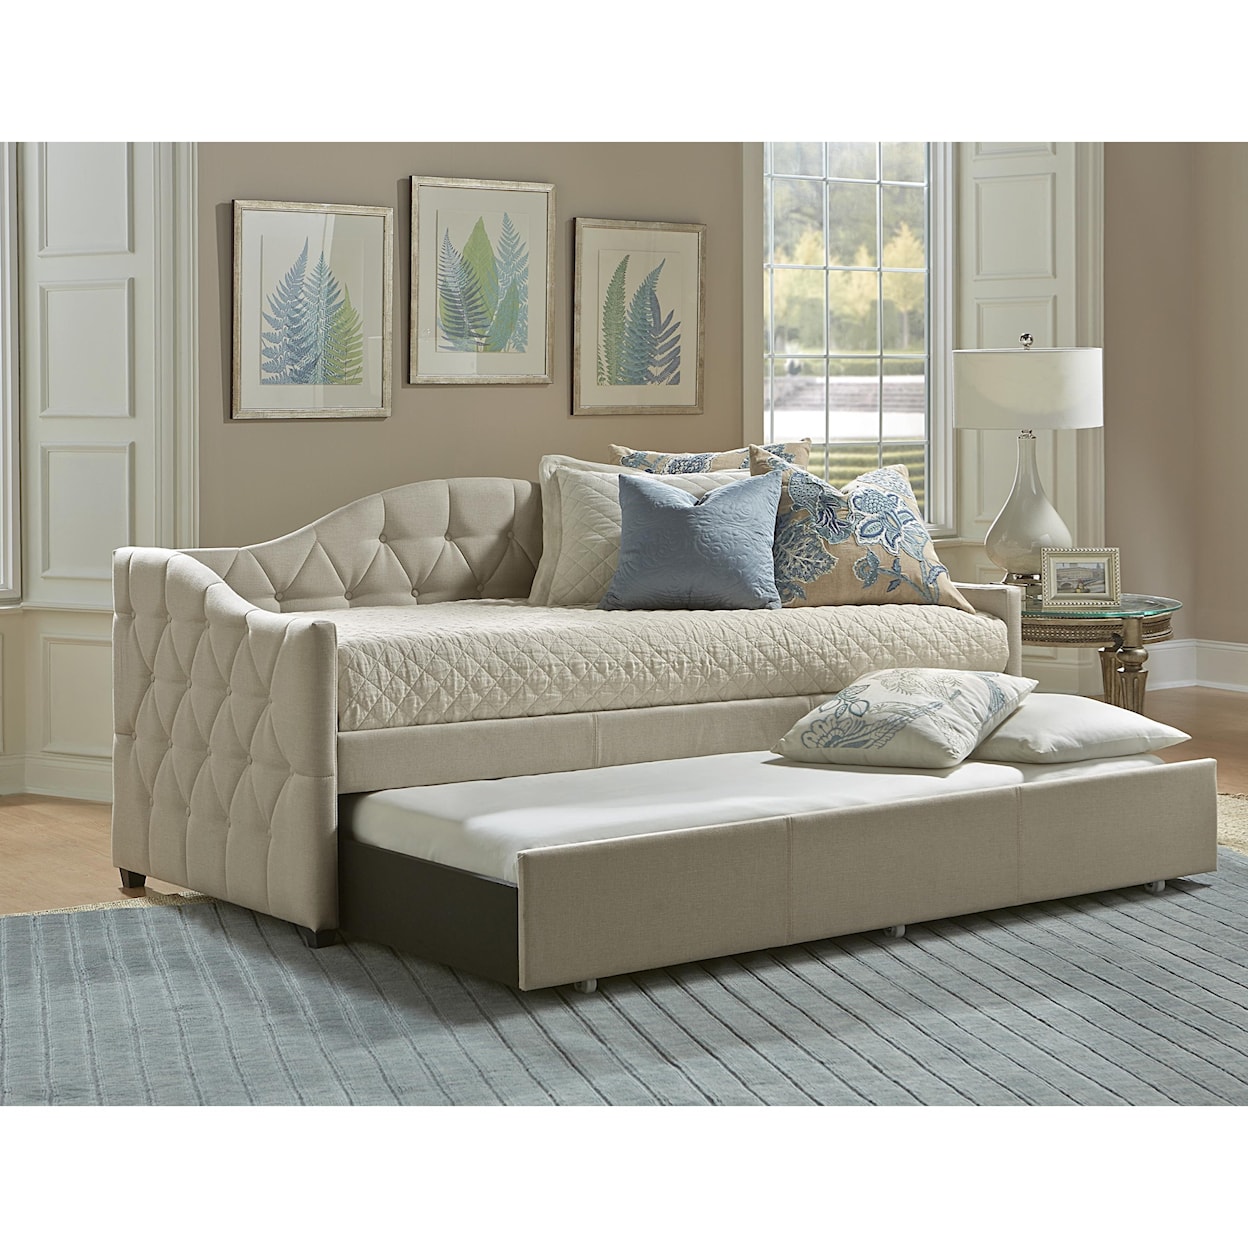 Hillsdale Daybeds Daybed with Trundle